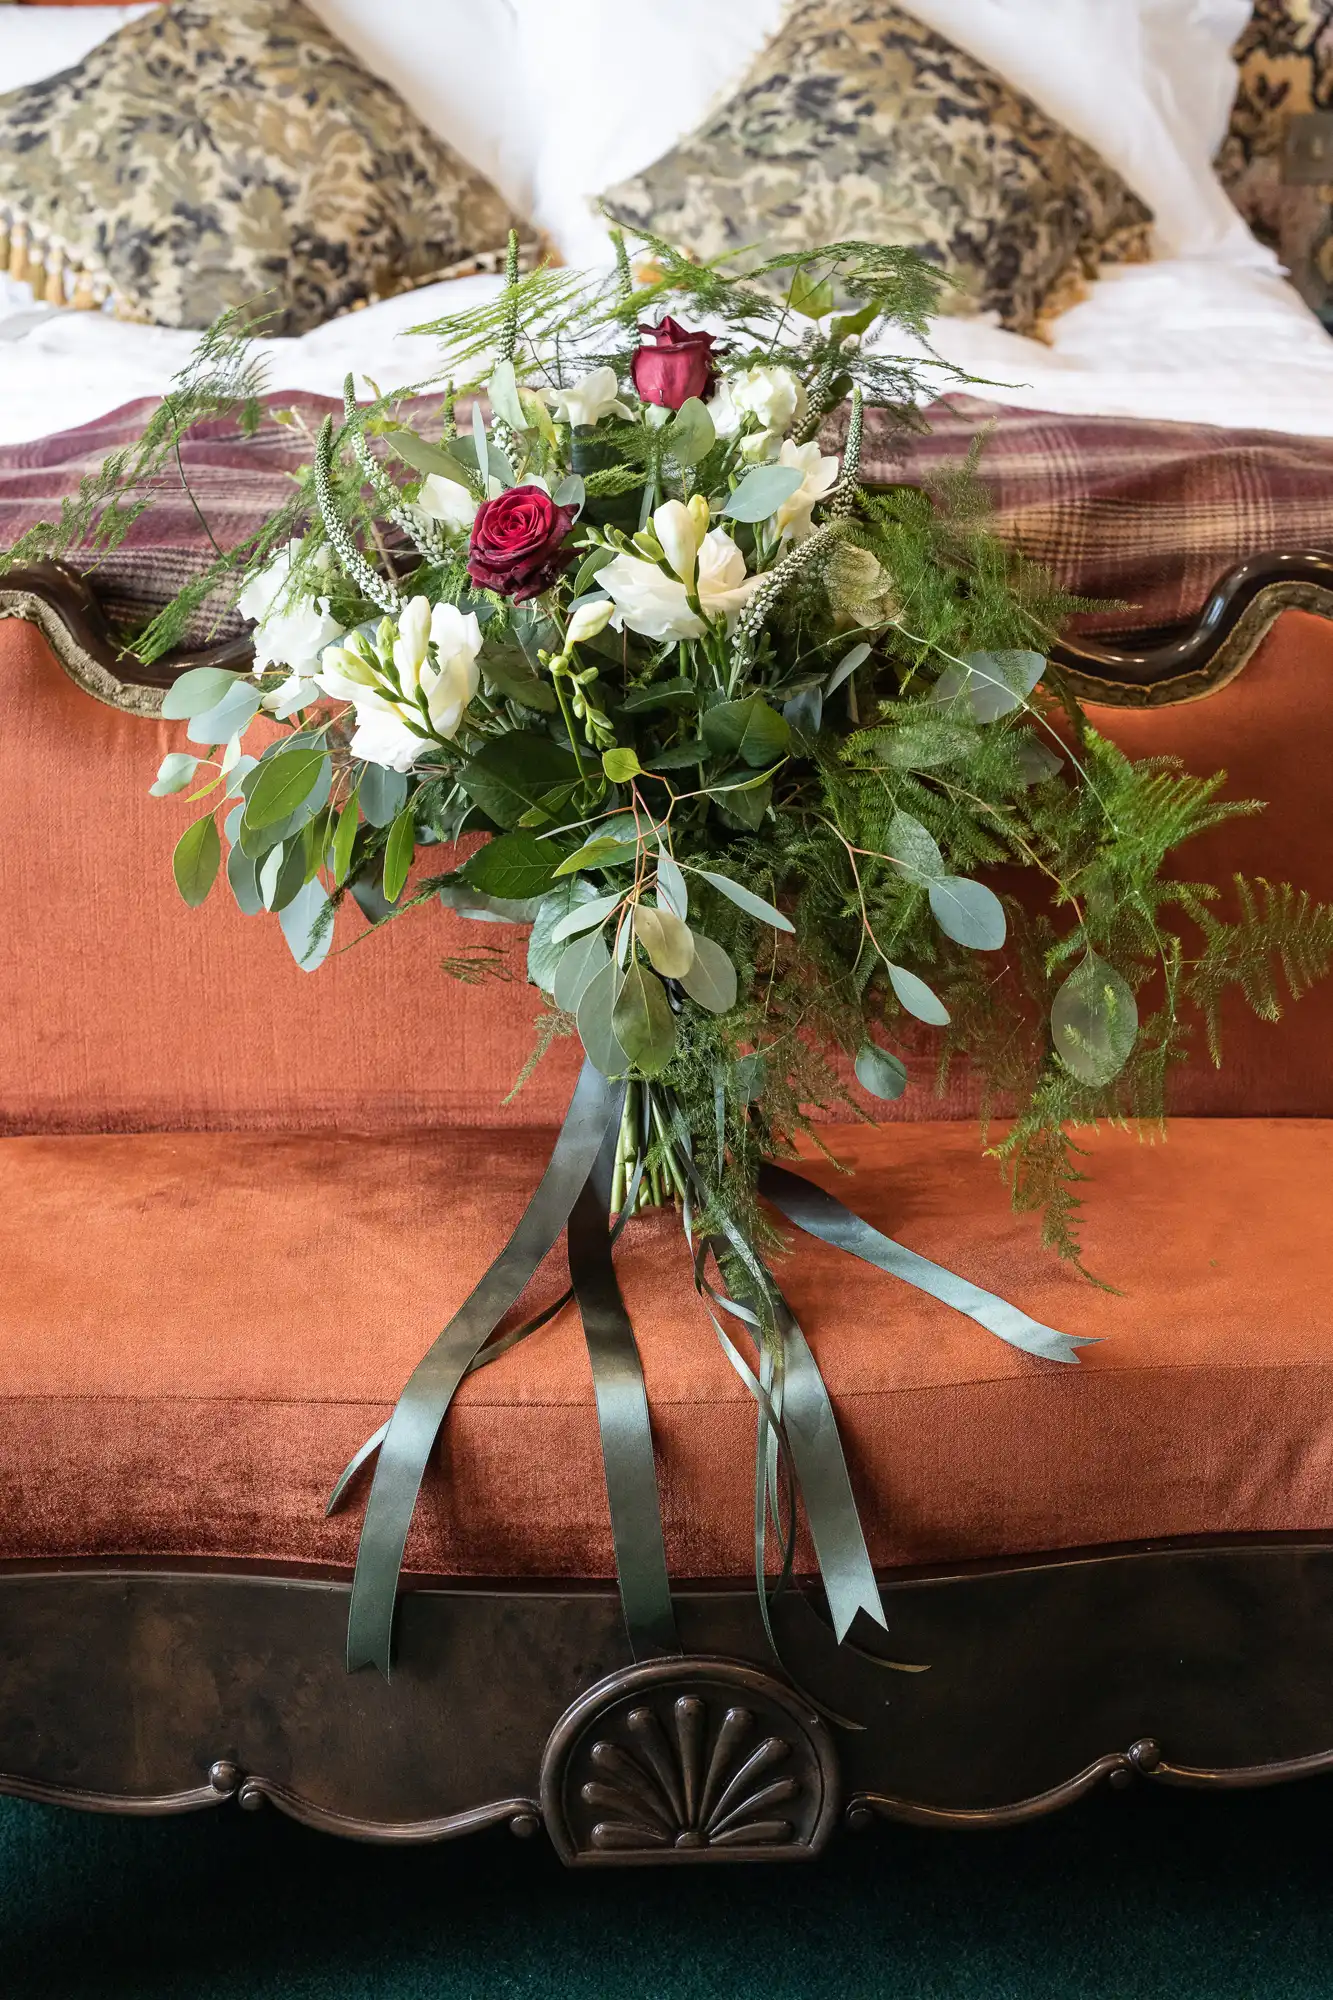 A bouquet of red roses and white flowers with green foliage and long ribbons, placed on a plush orange bedspread with patterned pillows in the background.